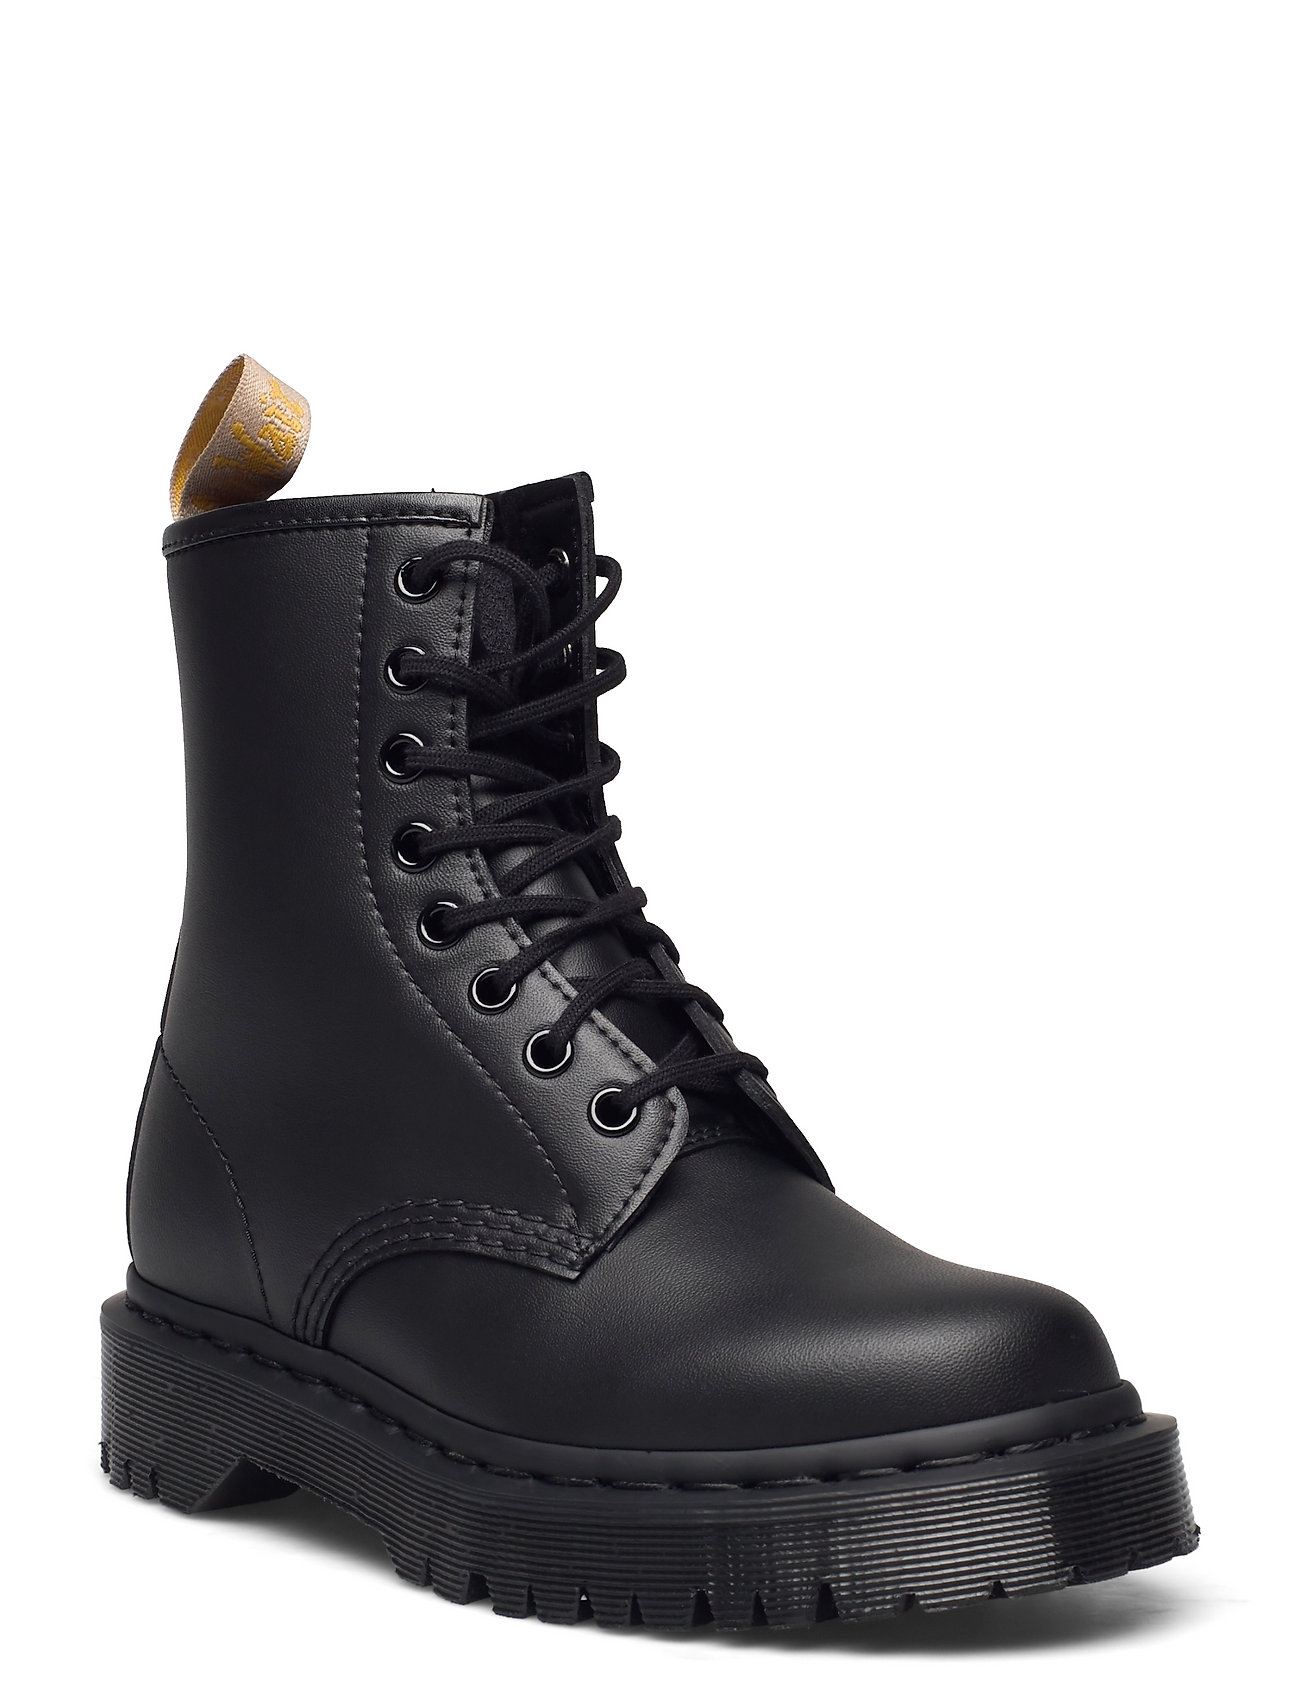 Vegan 1460 Bex Mono Black Felix Rub Off Shoes Boots Ankle Boots Ankle Boot - Flat Musta Dr. Martens